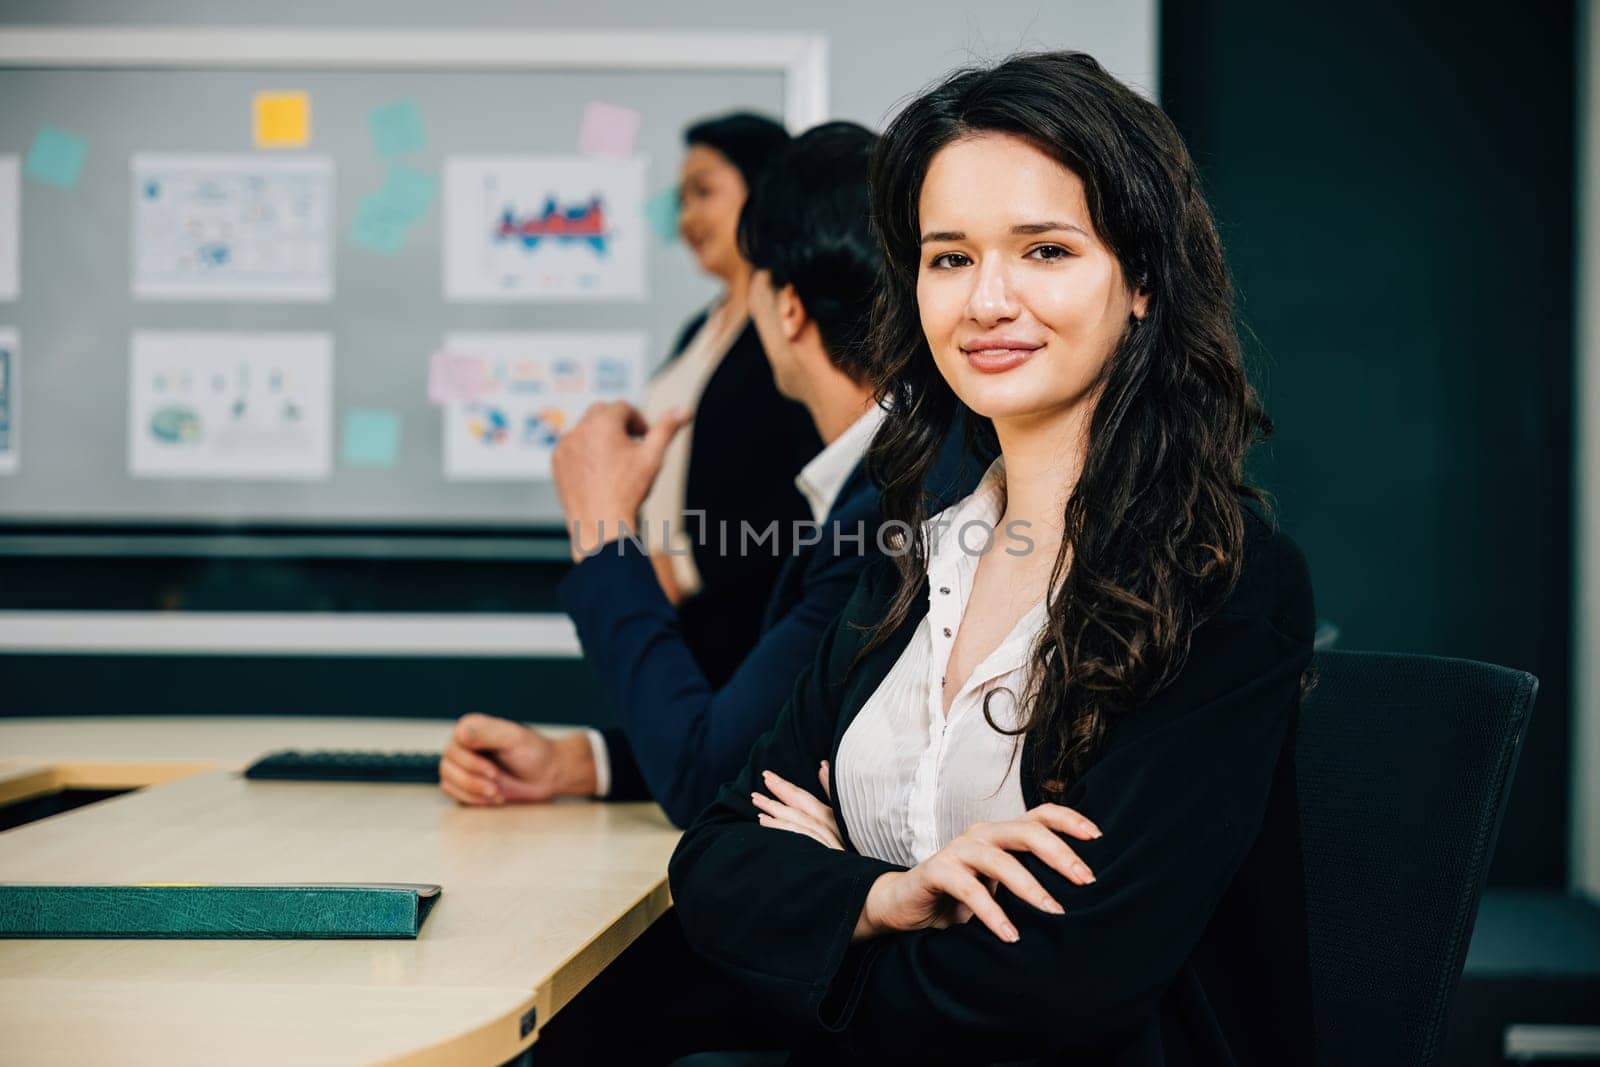 A portrait of a confident businesswoman in a vibrant meeting room. The CEO, manager, and diverse colleagues embody the essence of teamwork, strategy, and success. Workplace collaboration is thriving.